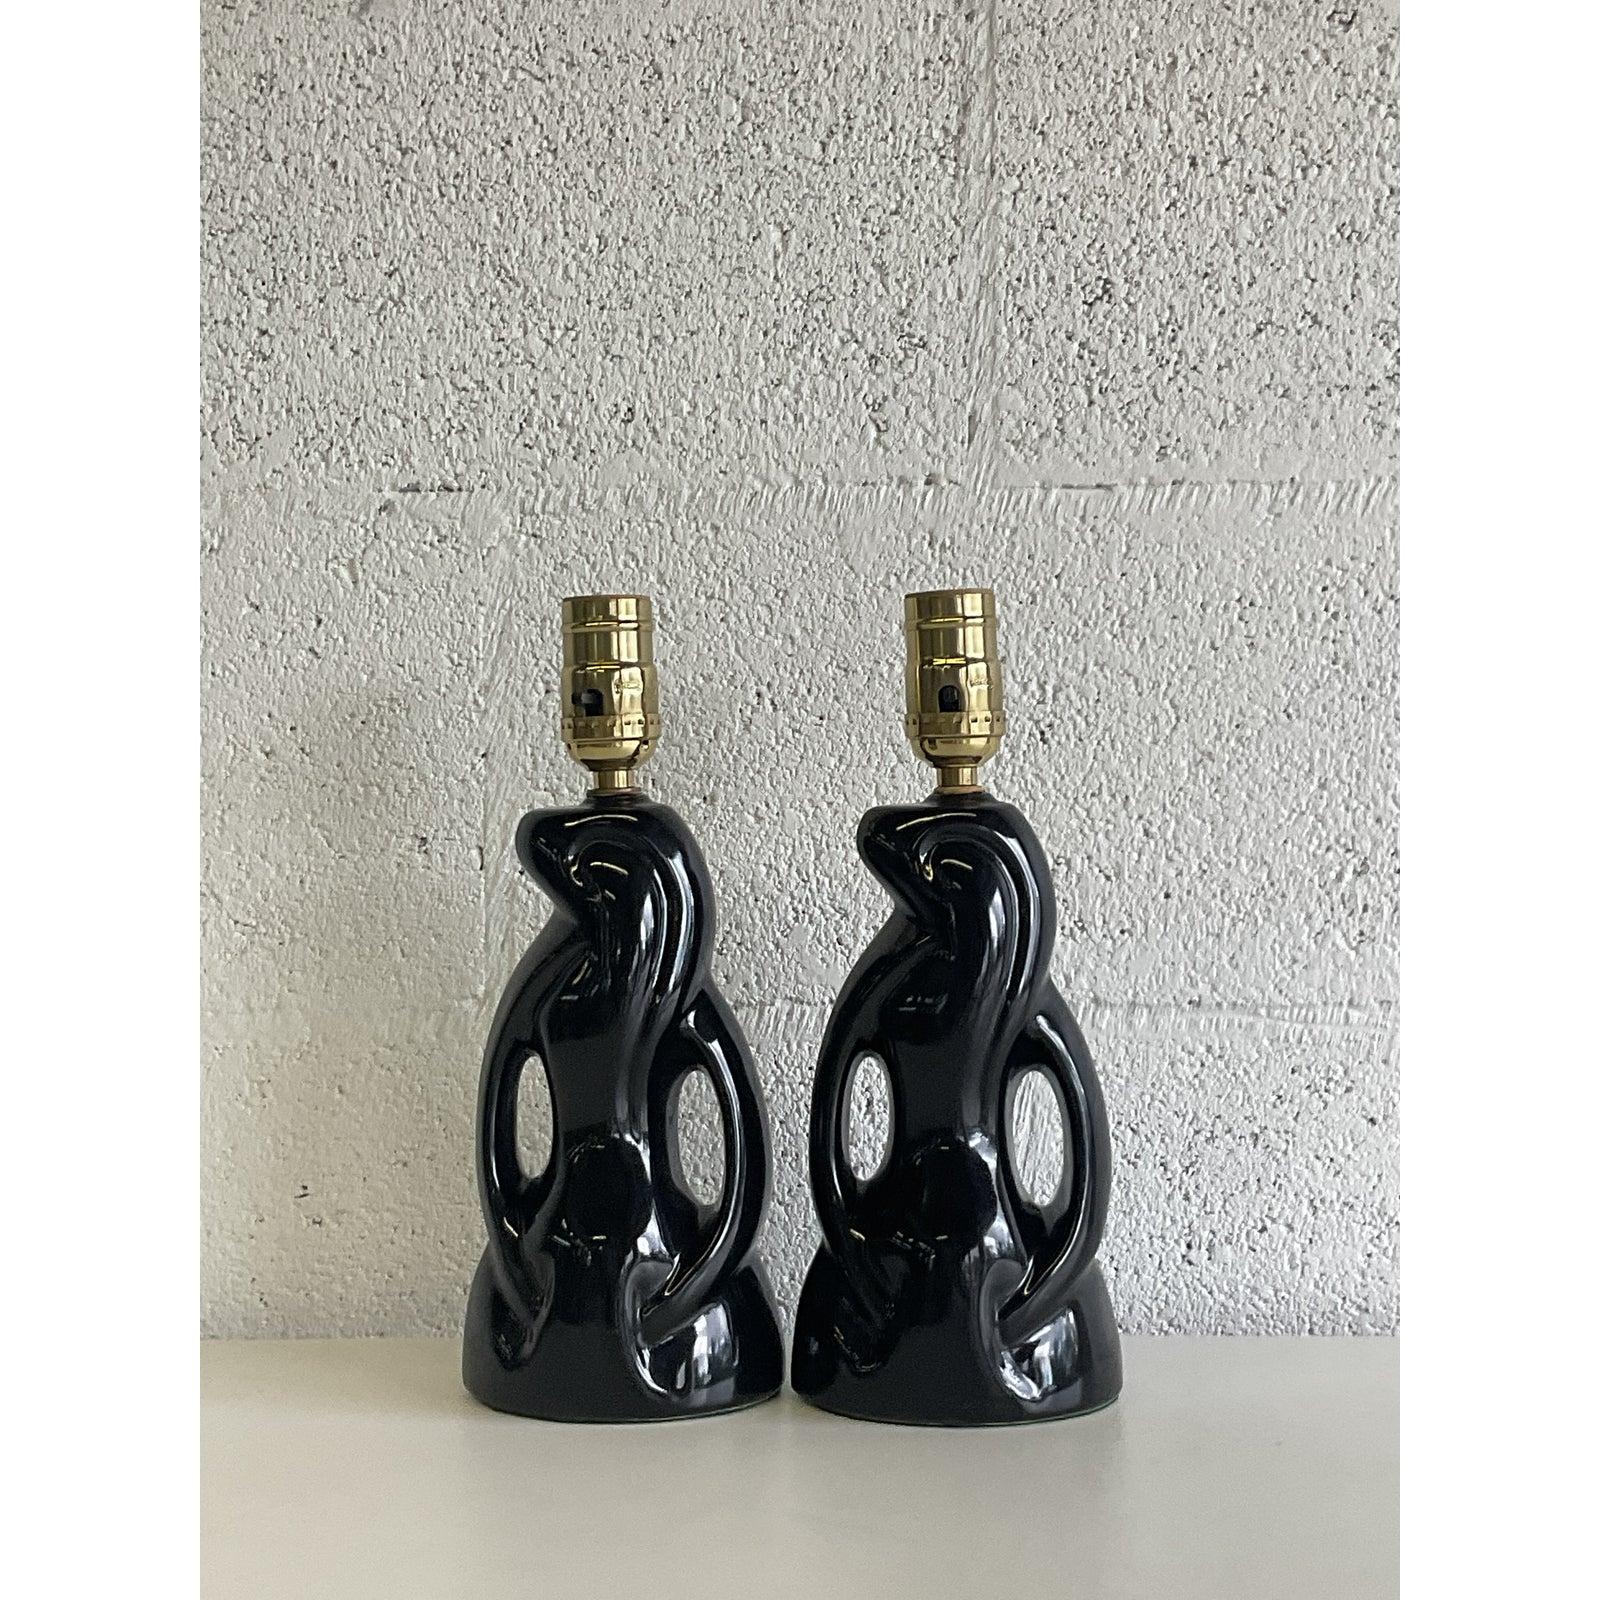 20th Century Midcentury Abstract Black Glazed Ceramic Boudoir Lamps - A Pair For Sale